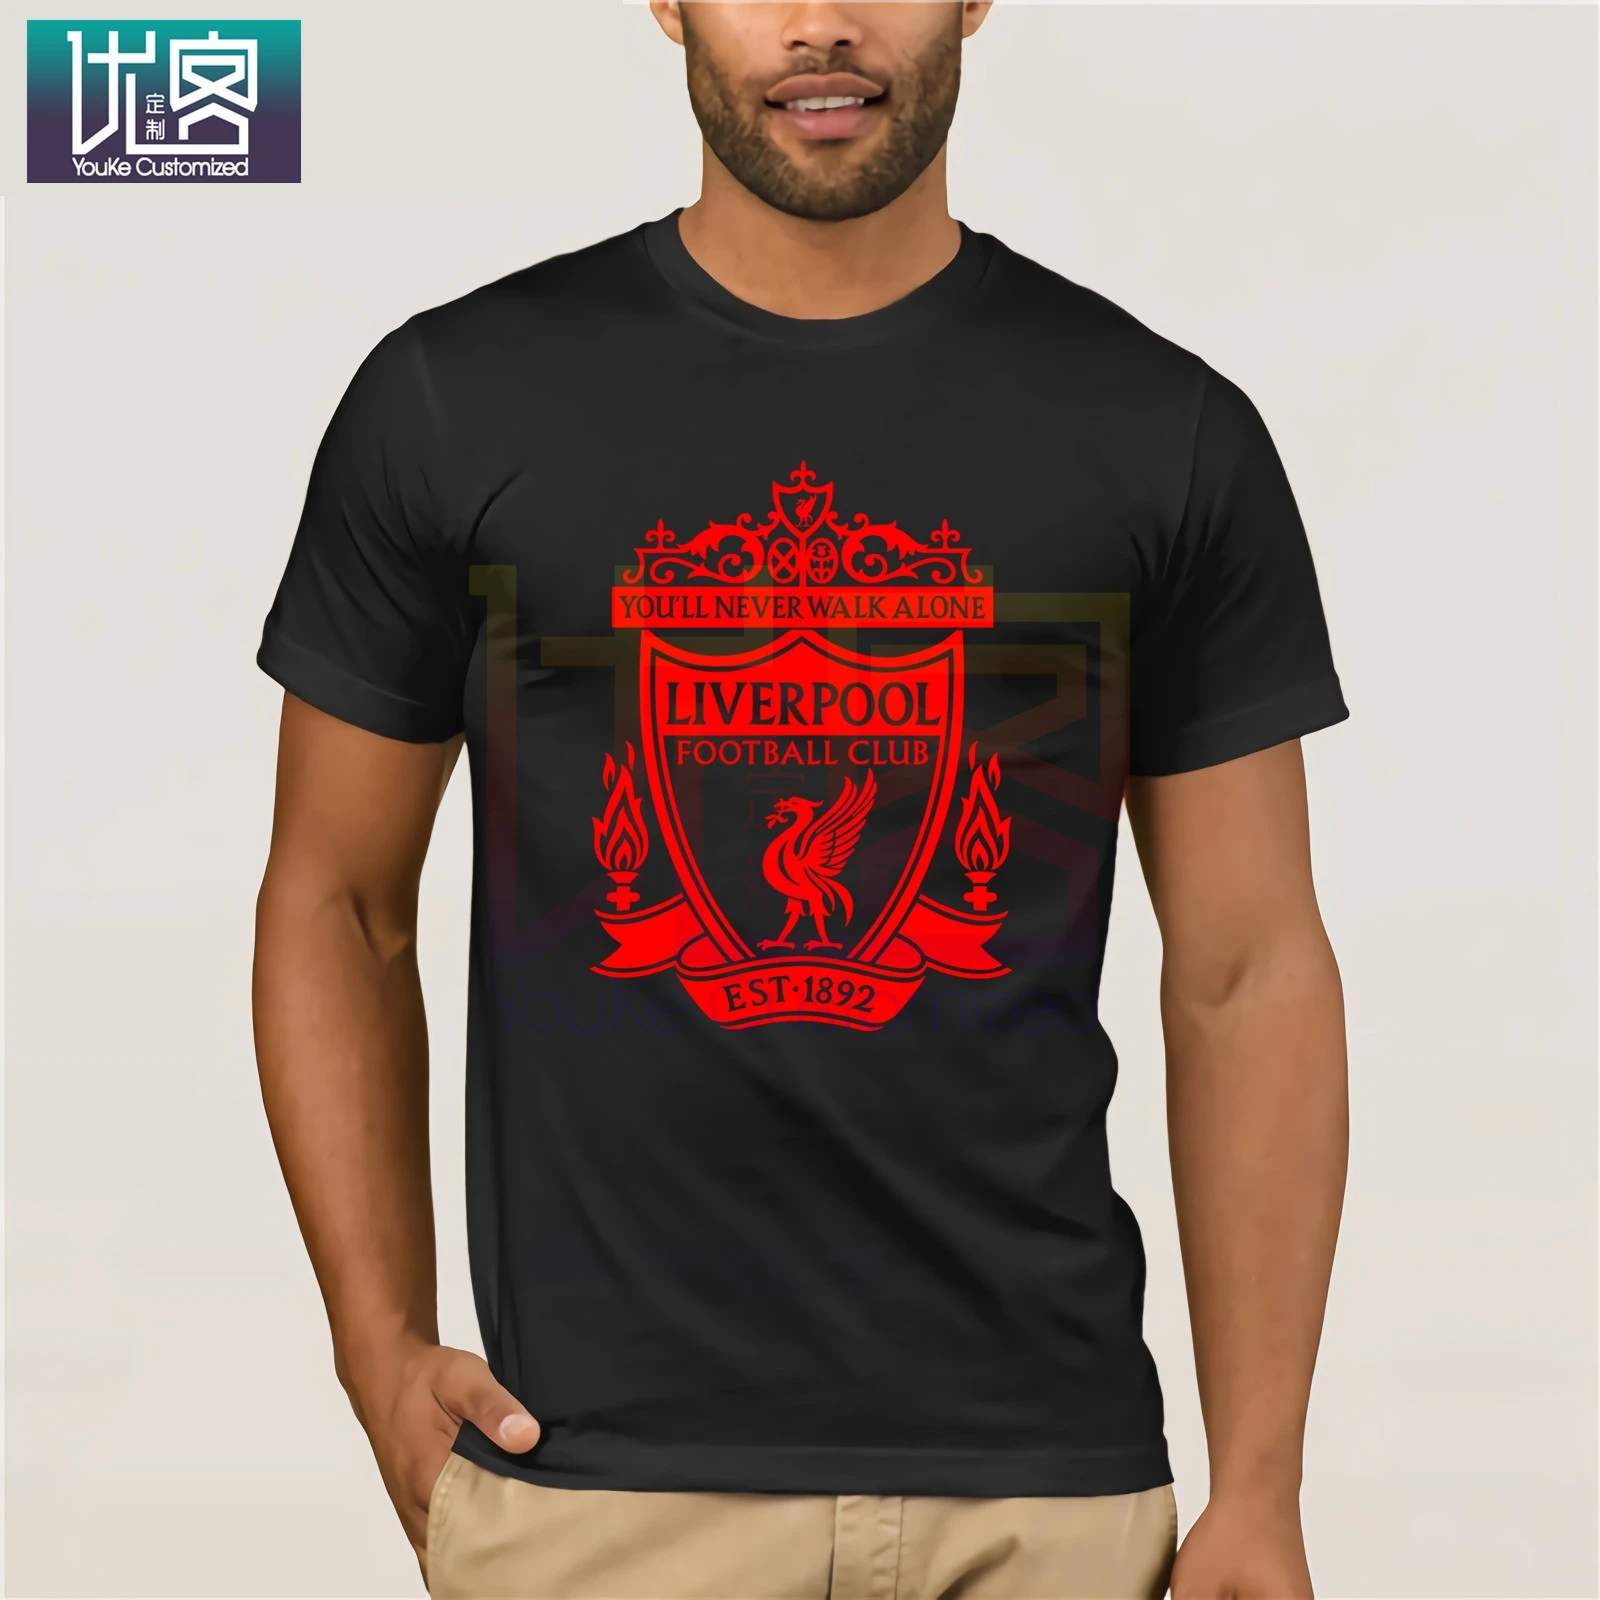 

Authentic LIVERPOOL Mono Color Logo Slim-Fit T-Shirt Heather Charcoal S-2XL NEW Free Shipping Light Cotton Tee Shirt Present